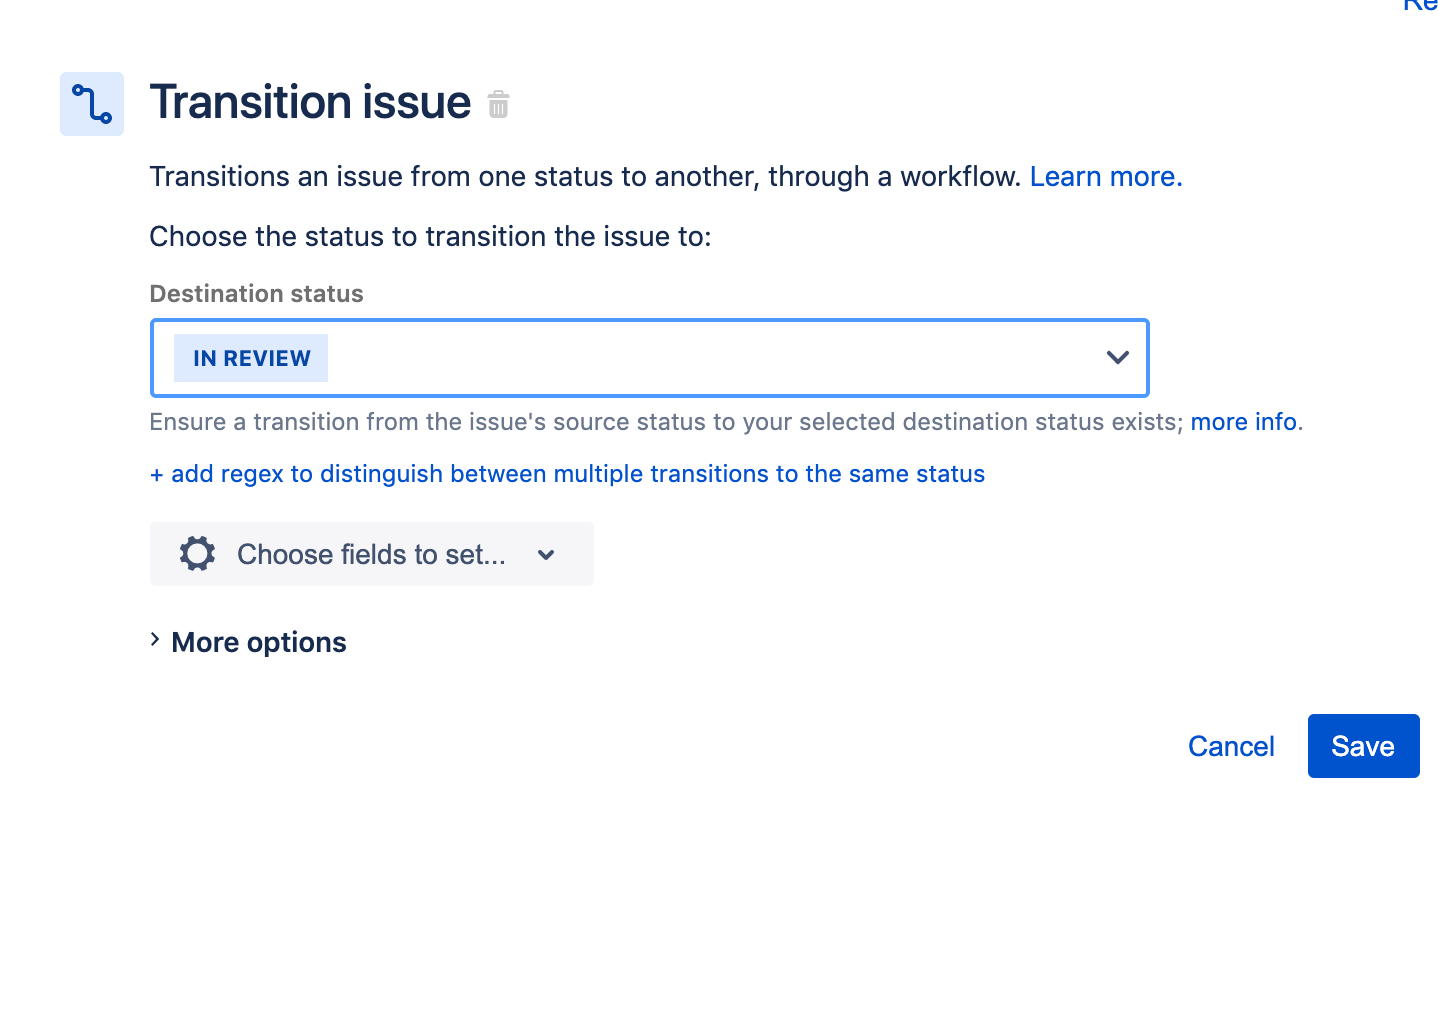 Adding "in review" to transition issue